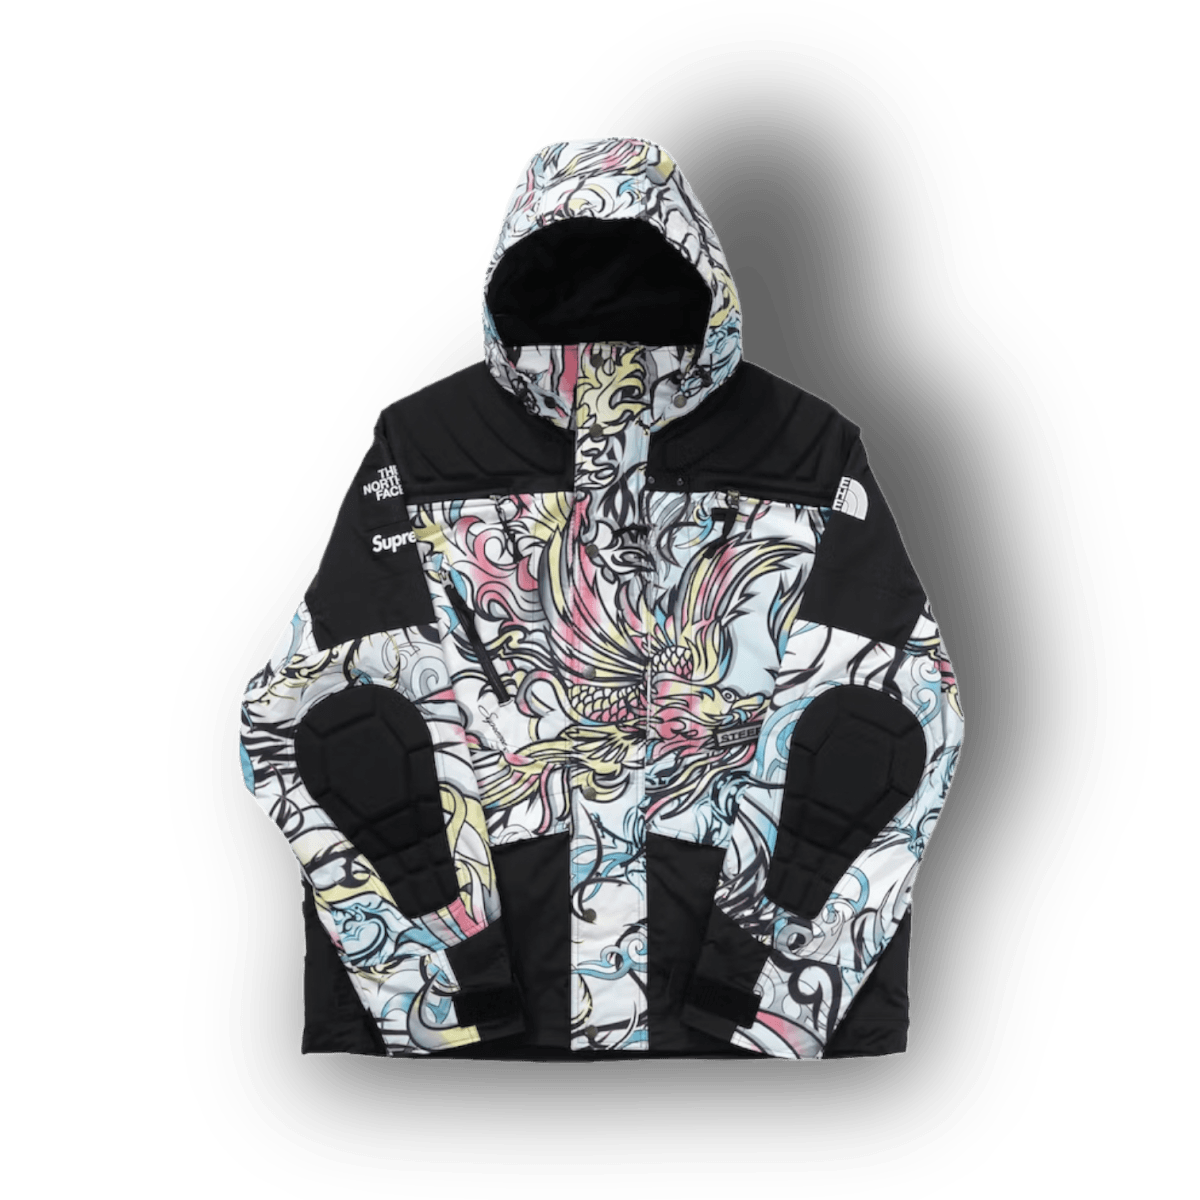 Supreme The North Face Steep Tech Apogee Jacket Multicolor Dragon - Outerwear - Supreme - Jawns on Fire